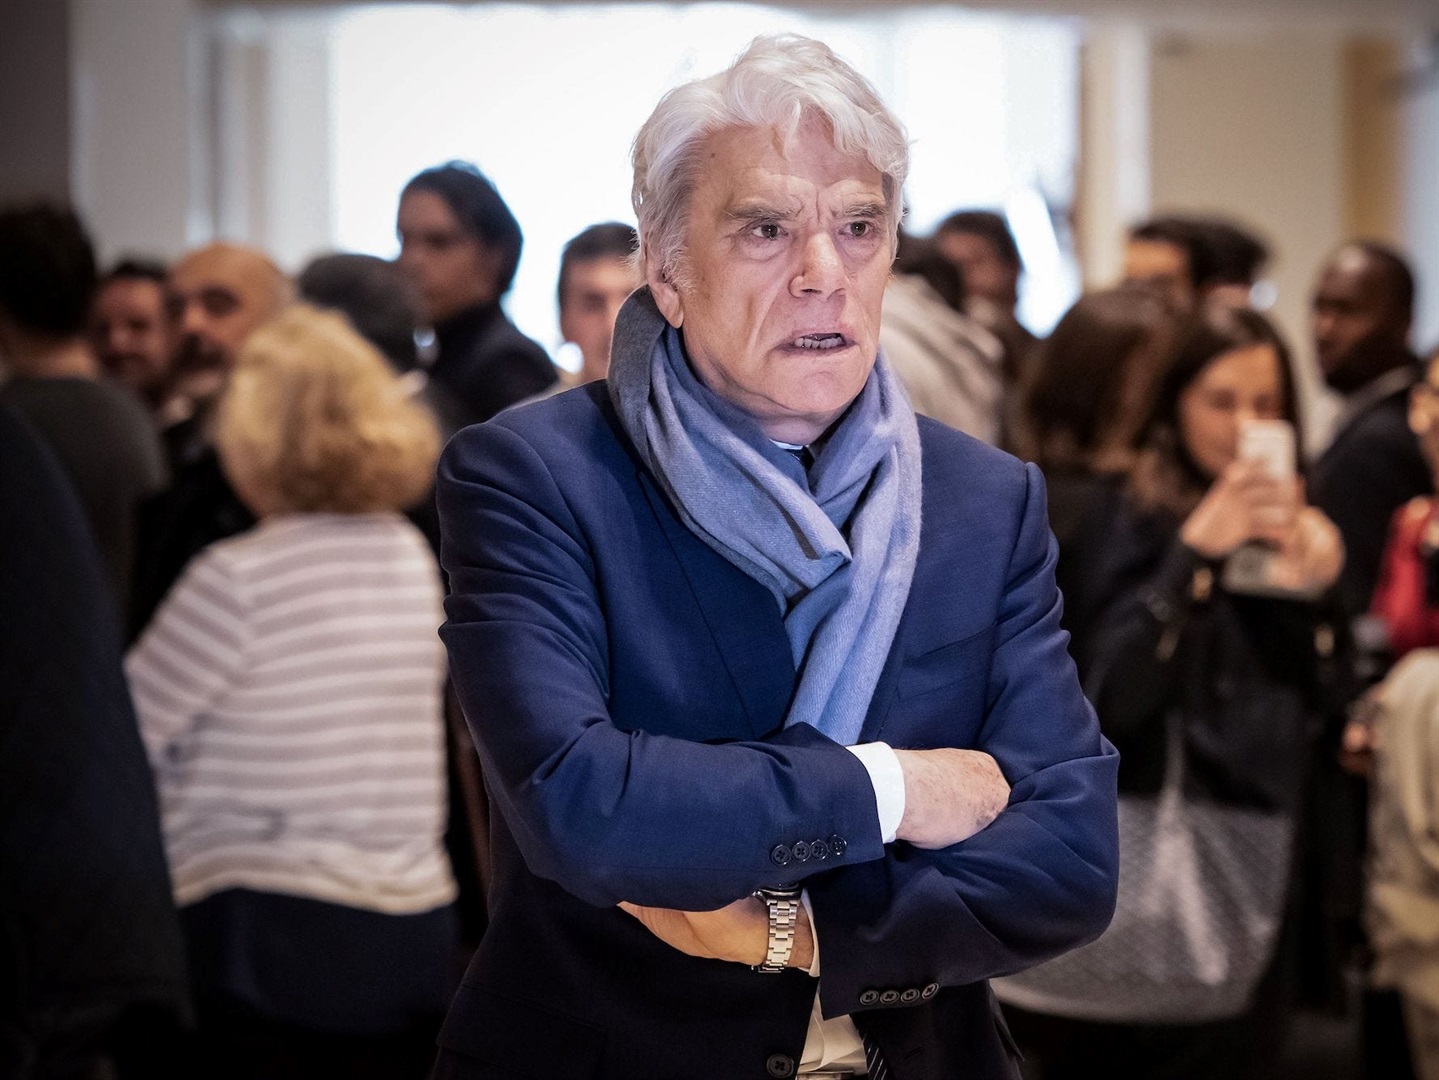 French business mogul, politician and former Adidas and football club owner Bernard Tapie dies